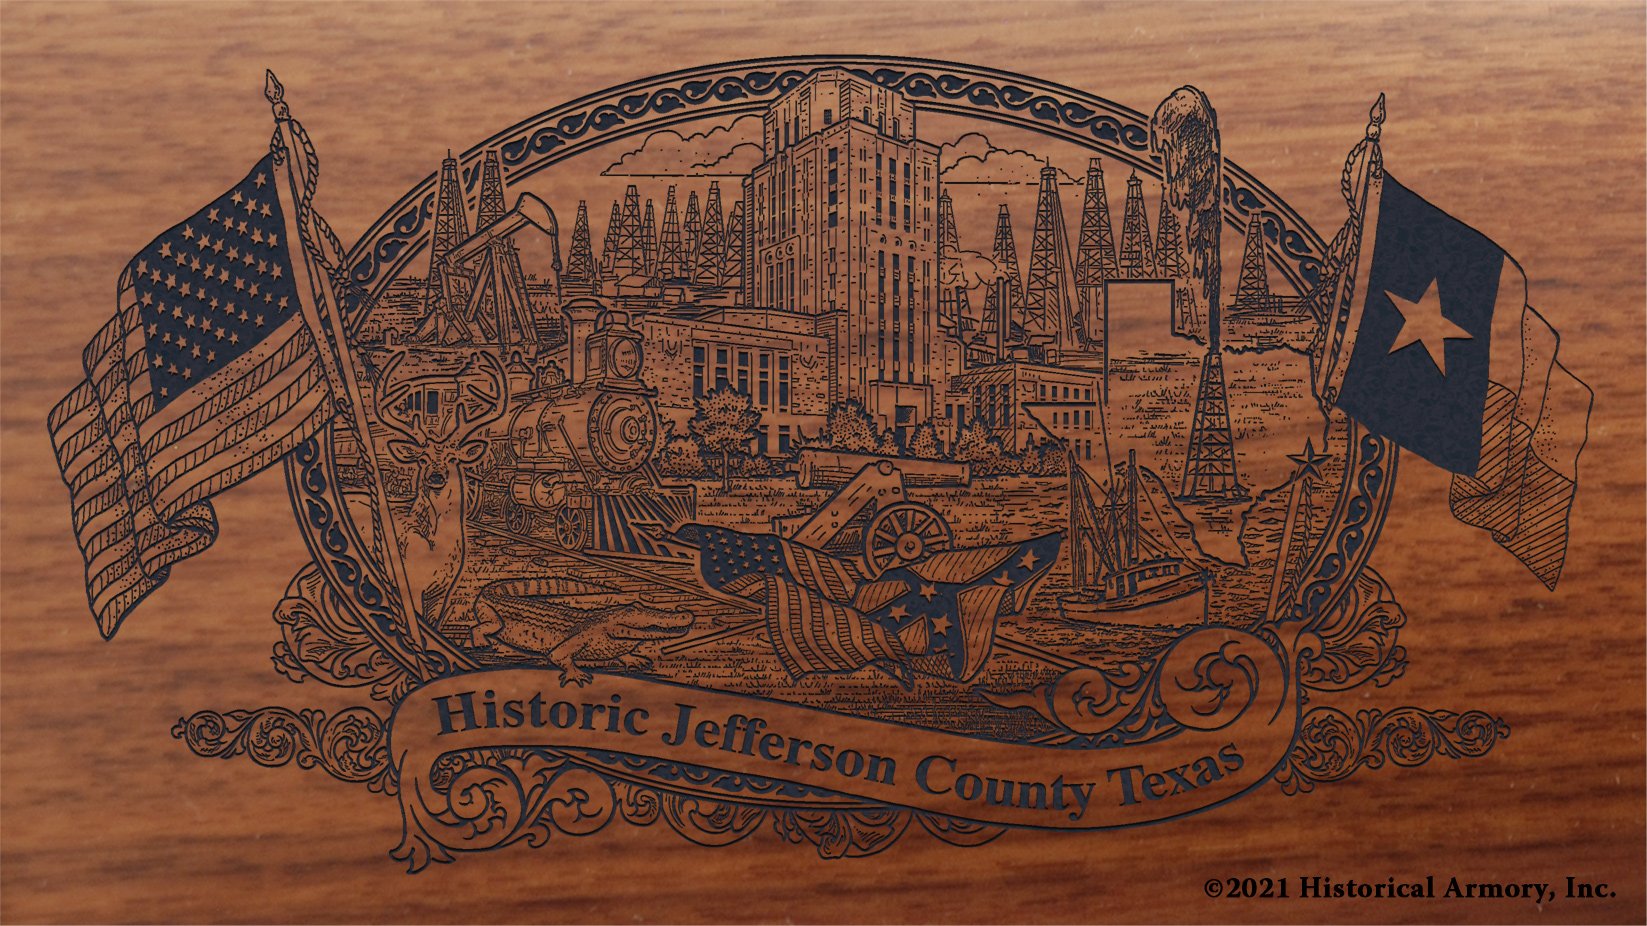 Engraved artwork | History of Jefferson County Texas | Historical Armory